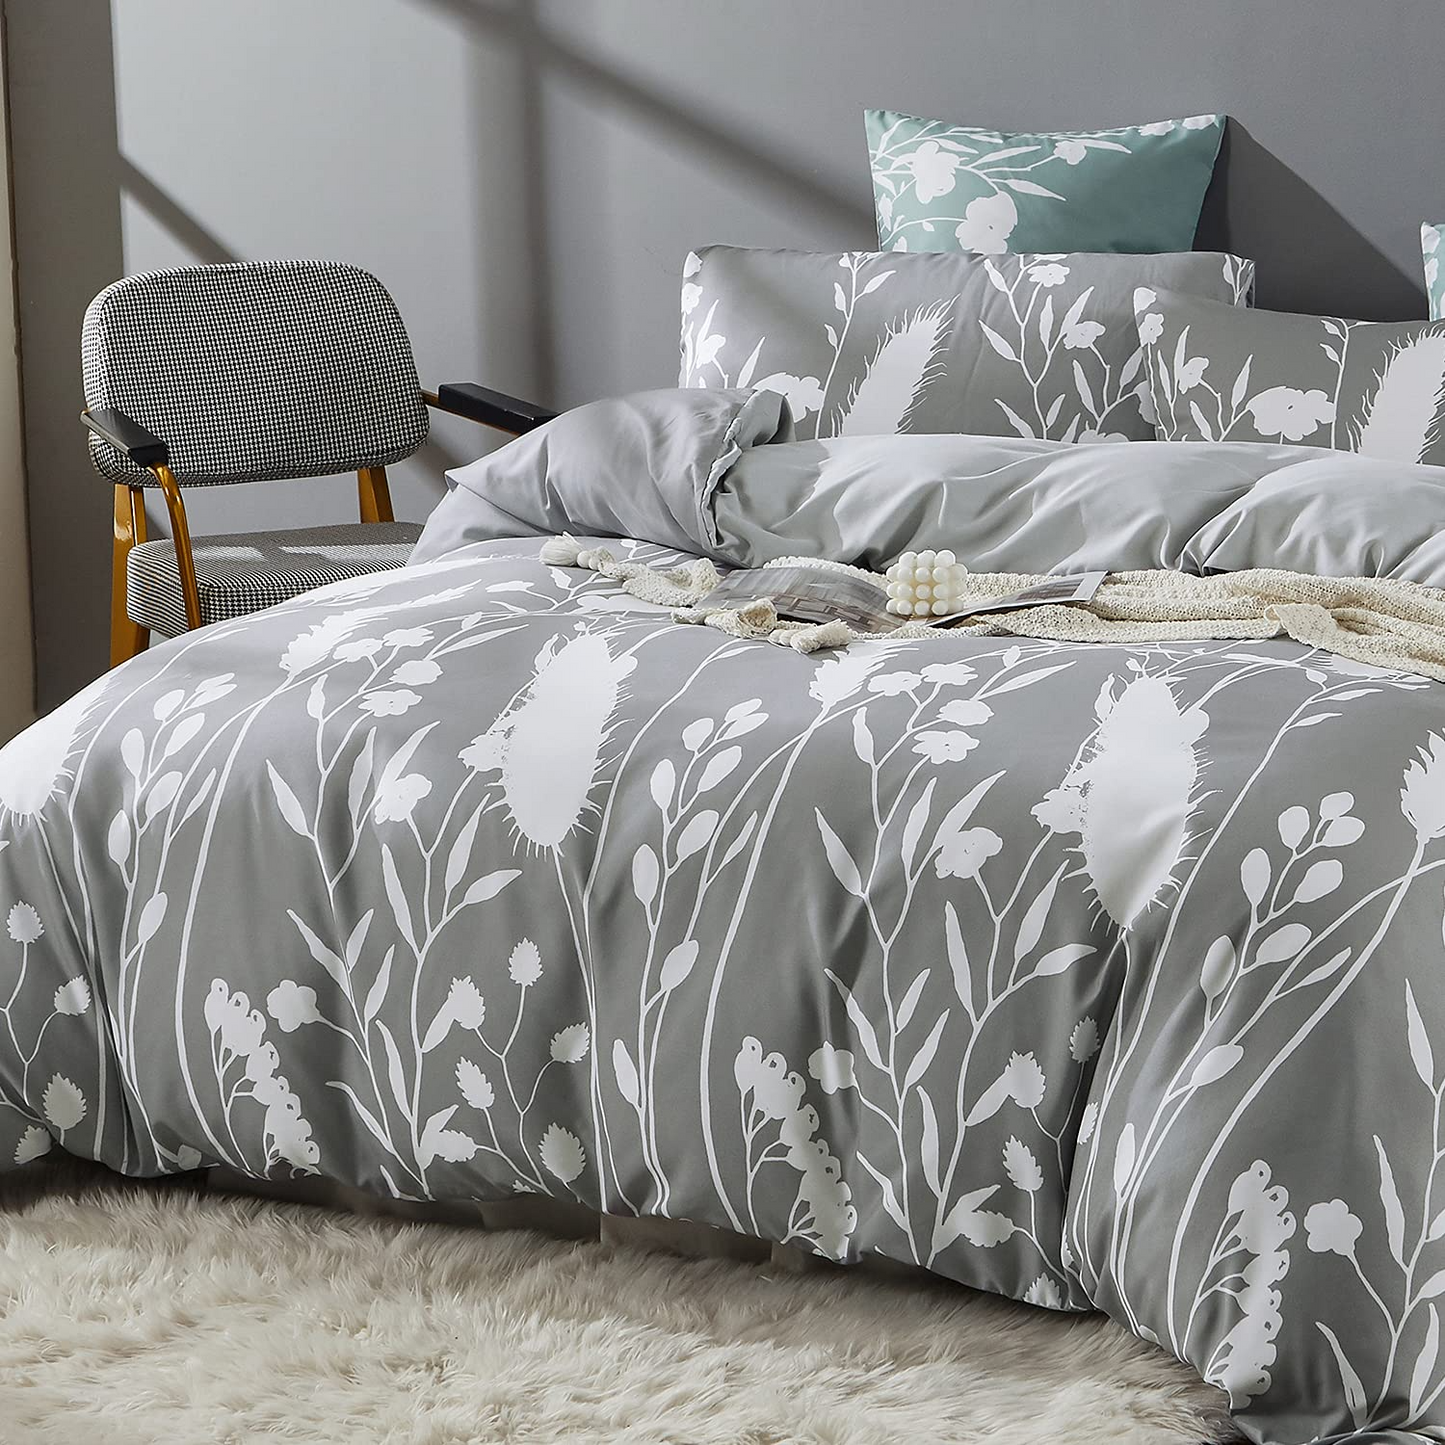 Grey Plant Pattern Comforter set 3 Pieces Bedding Comforter with 2 Pillow Cases